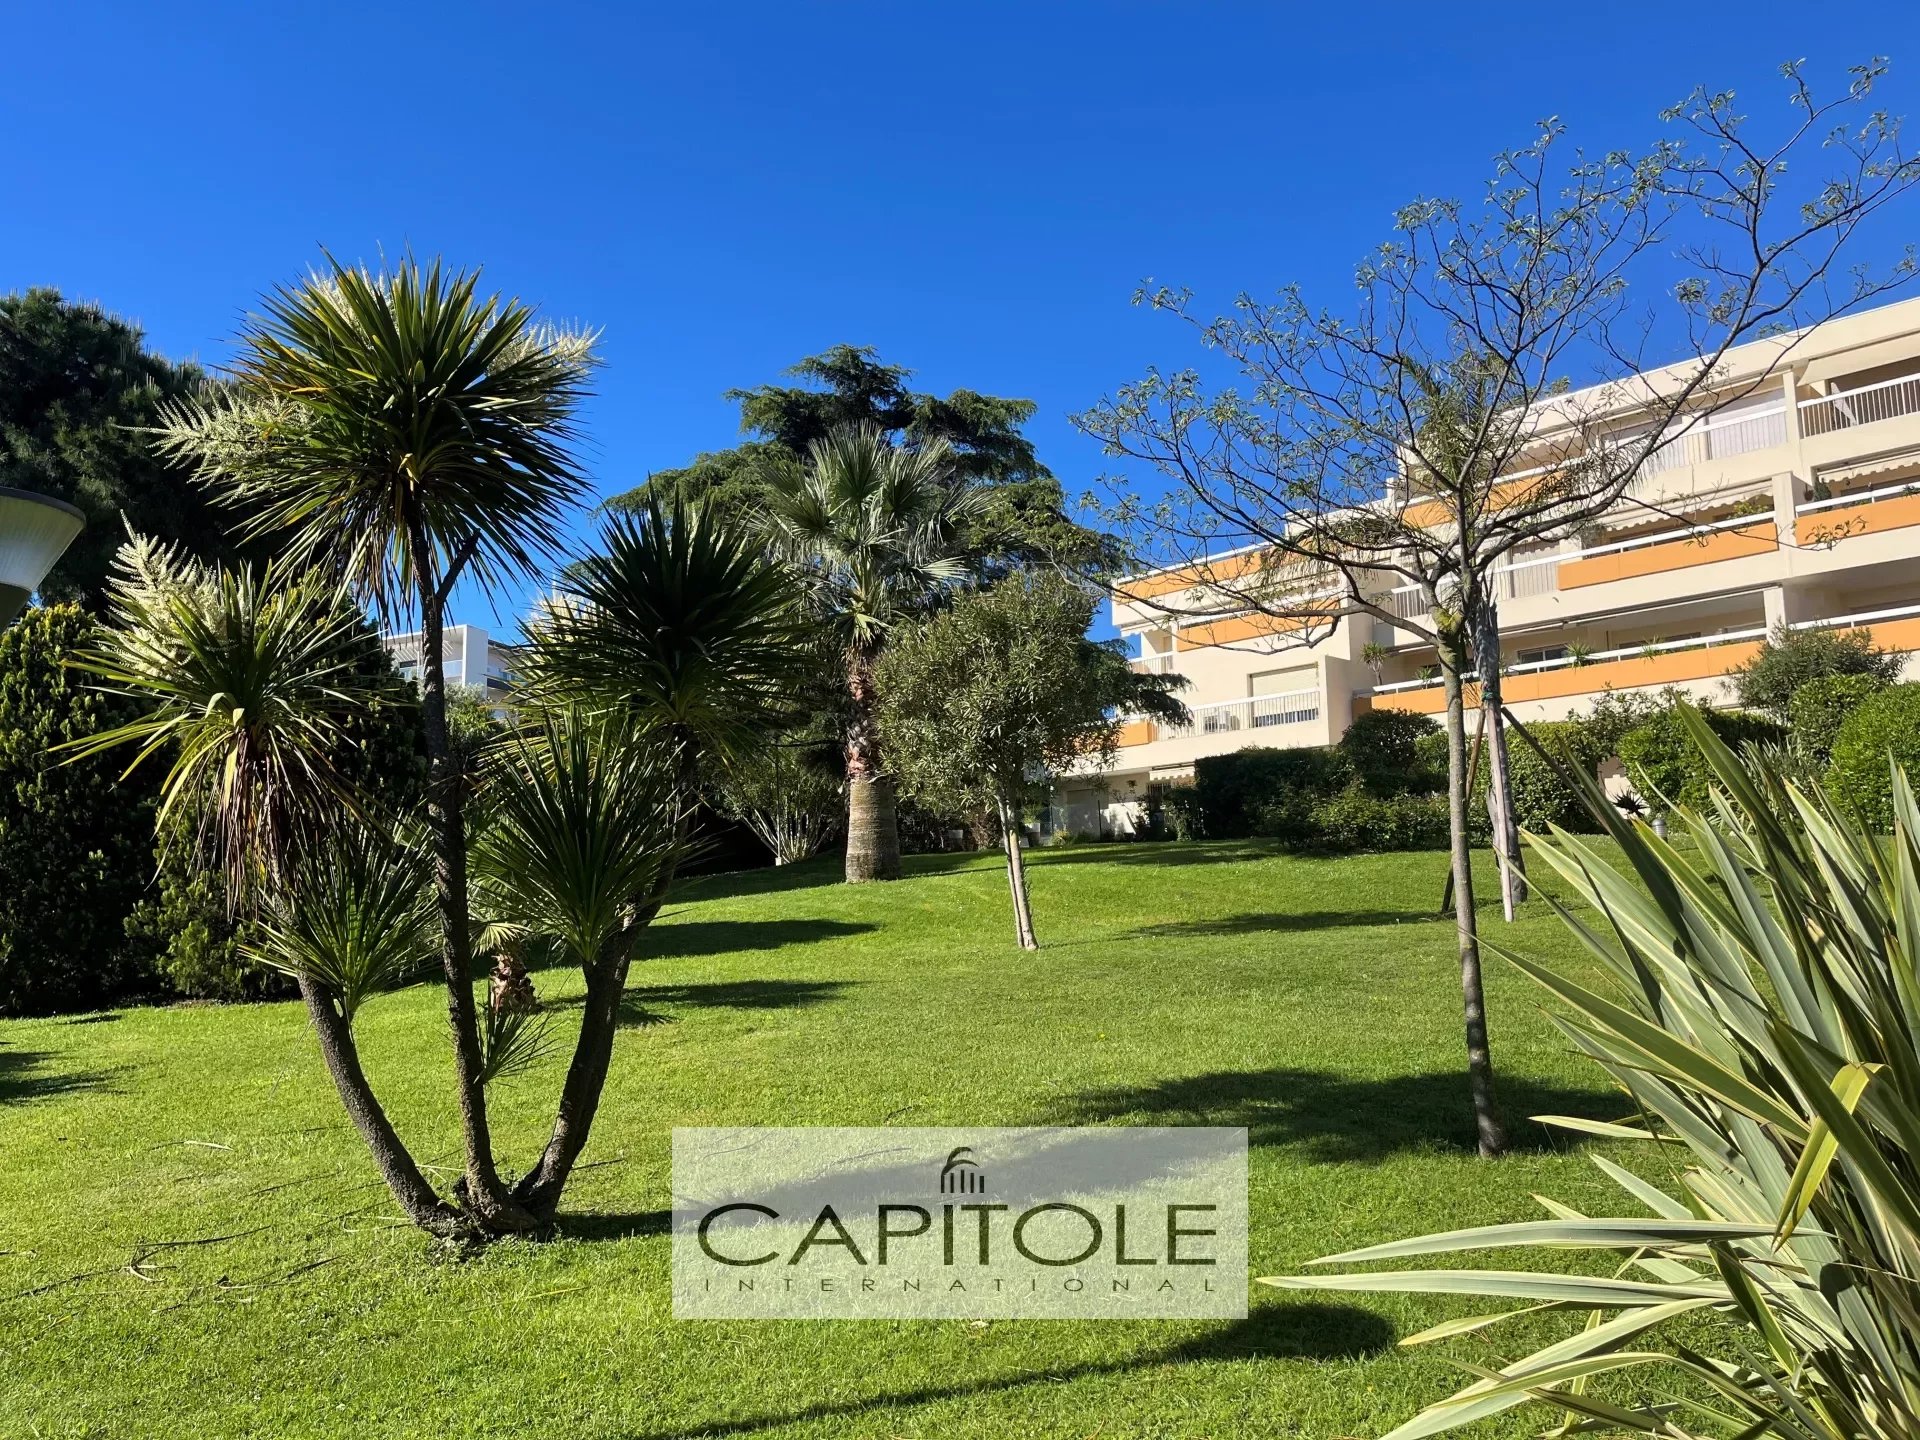 For sale, ANTIBES, SEA VIEW and Mountains,  3 bedrooom apartment, 94 m² , 2 terraces, balcony, sea view, garage, 2 private parkings spaces